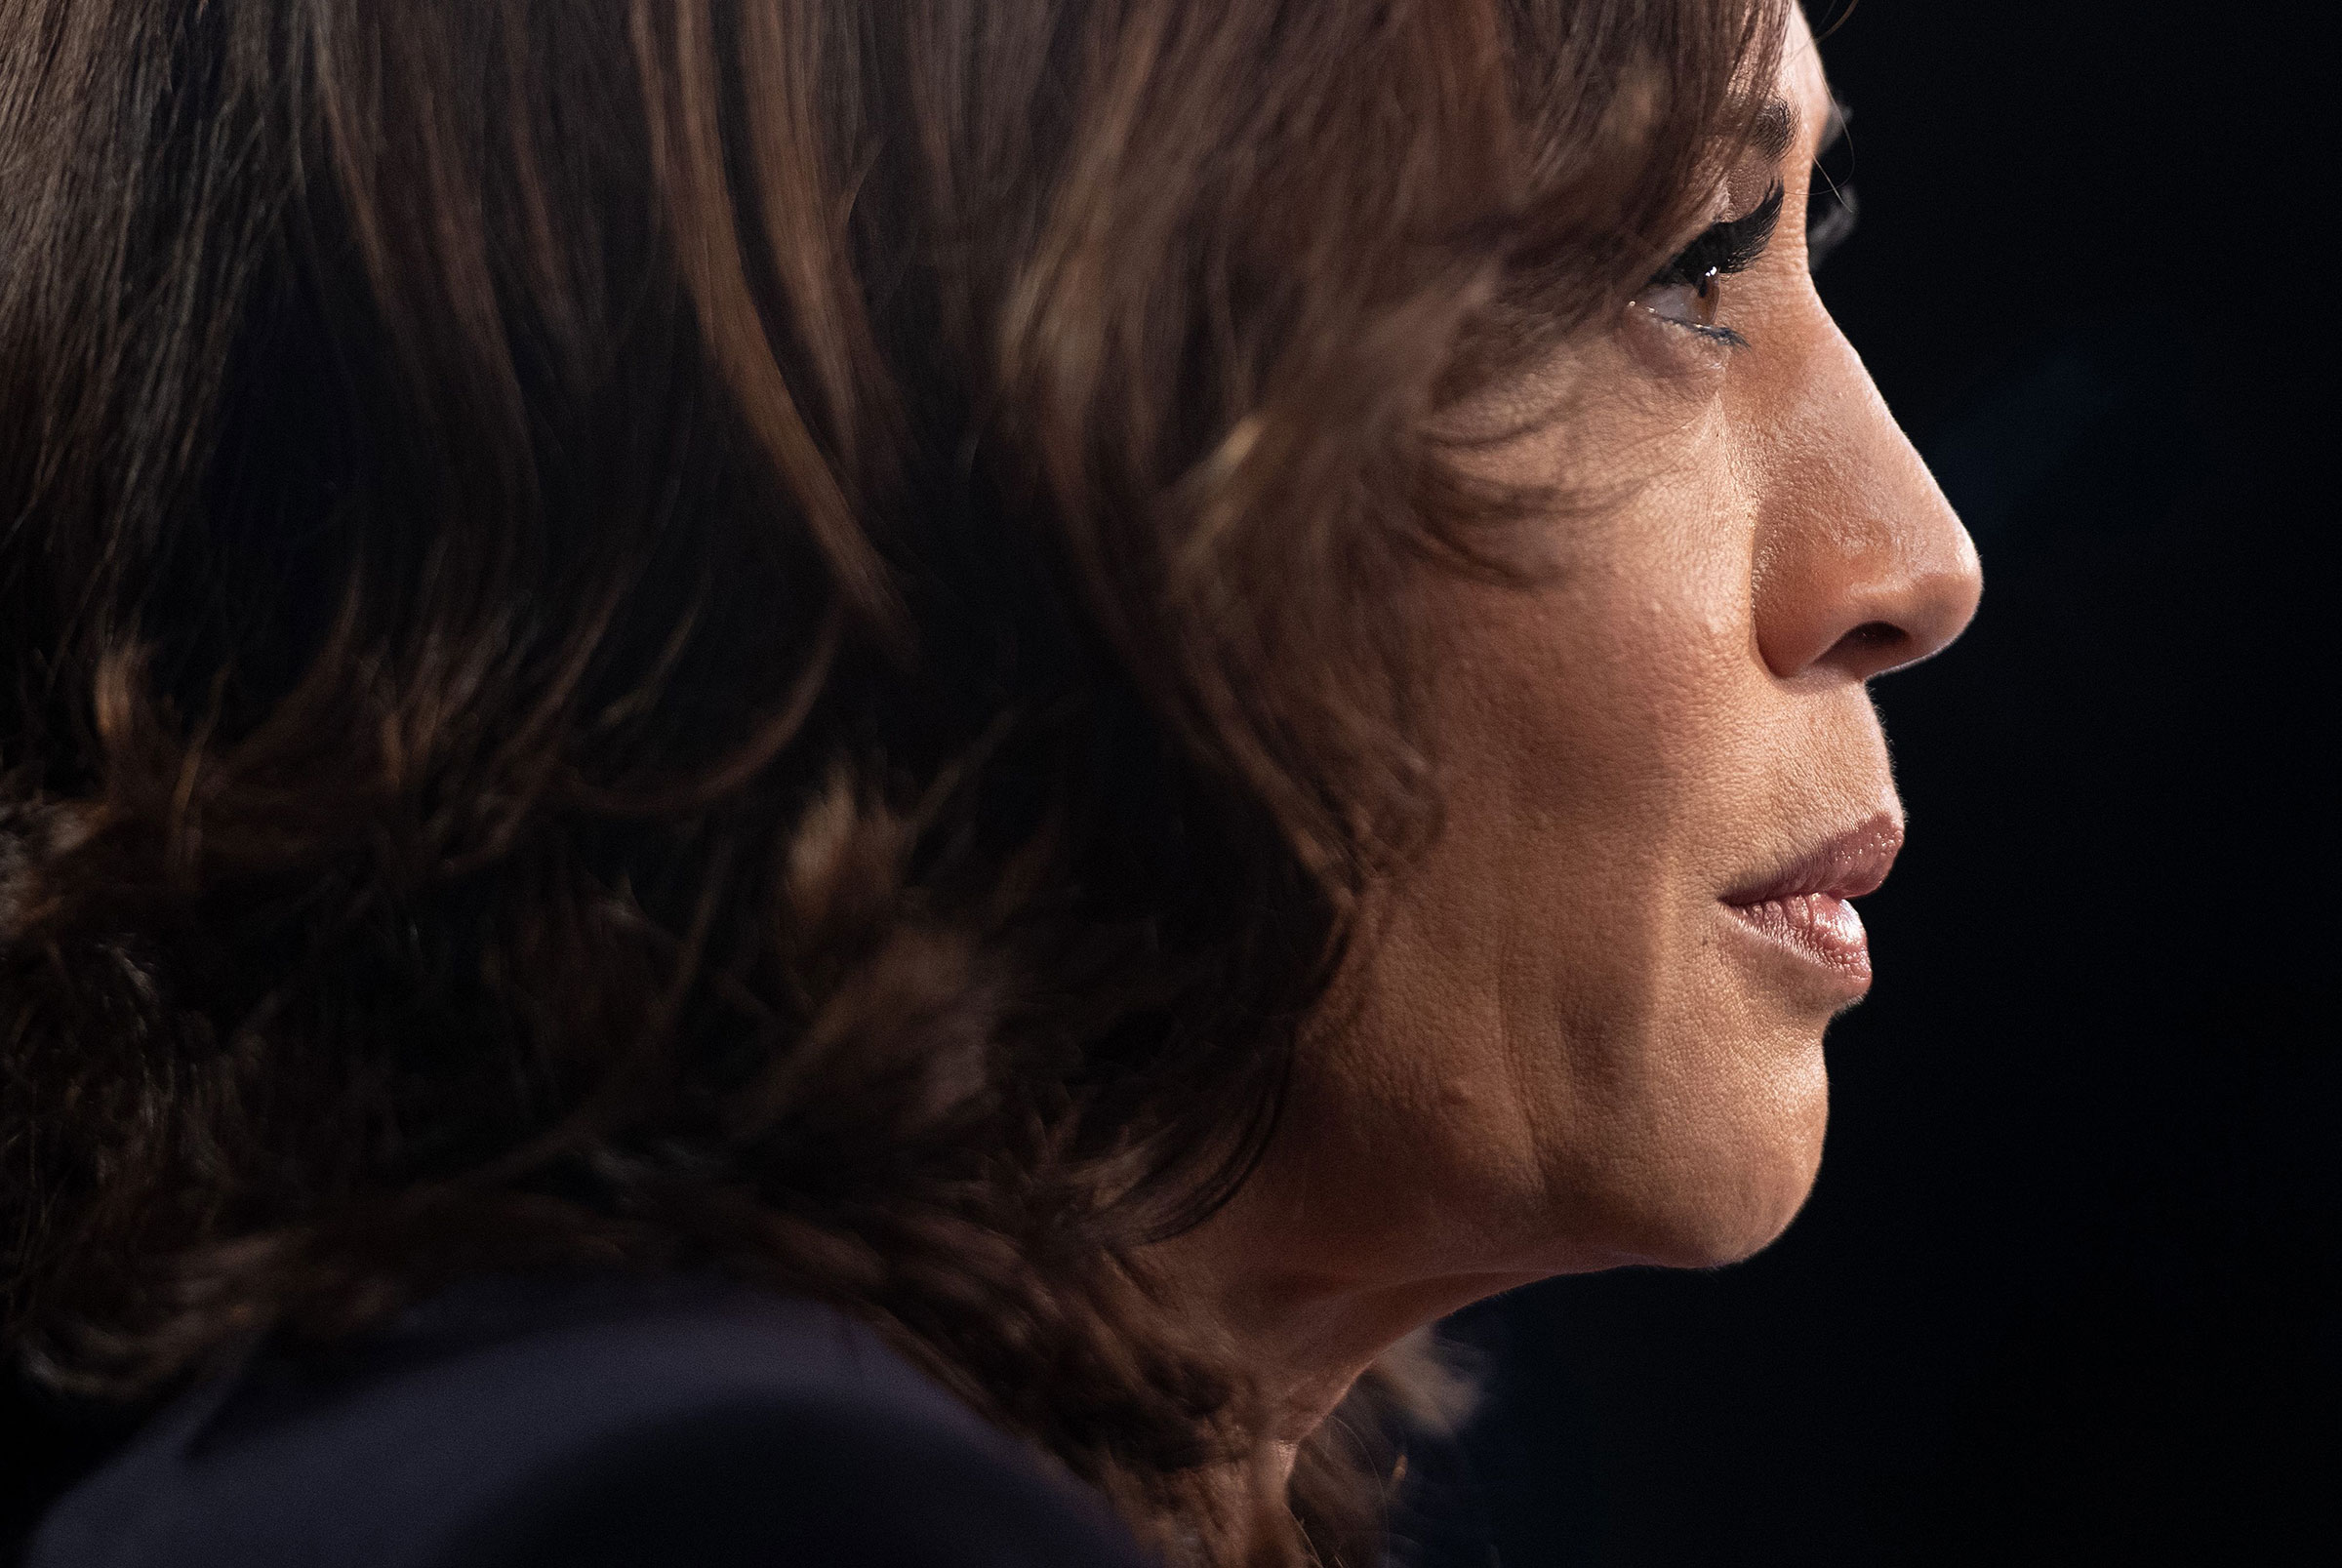 Sen. Kamala Harris in the Spin Room after the second Democratic primary debate of the 2020 presidential campaign. (Saul Loeb—AFP/Getty Images)